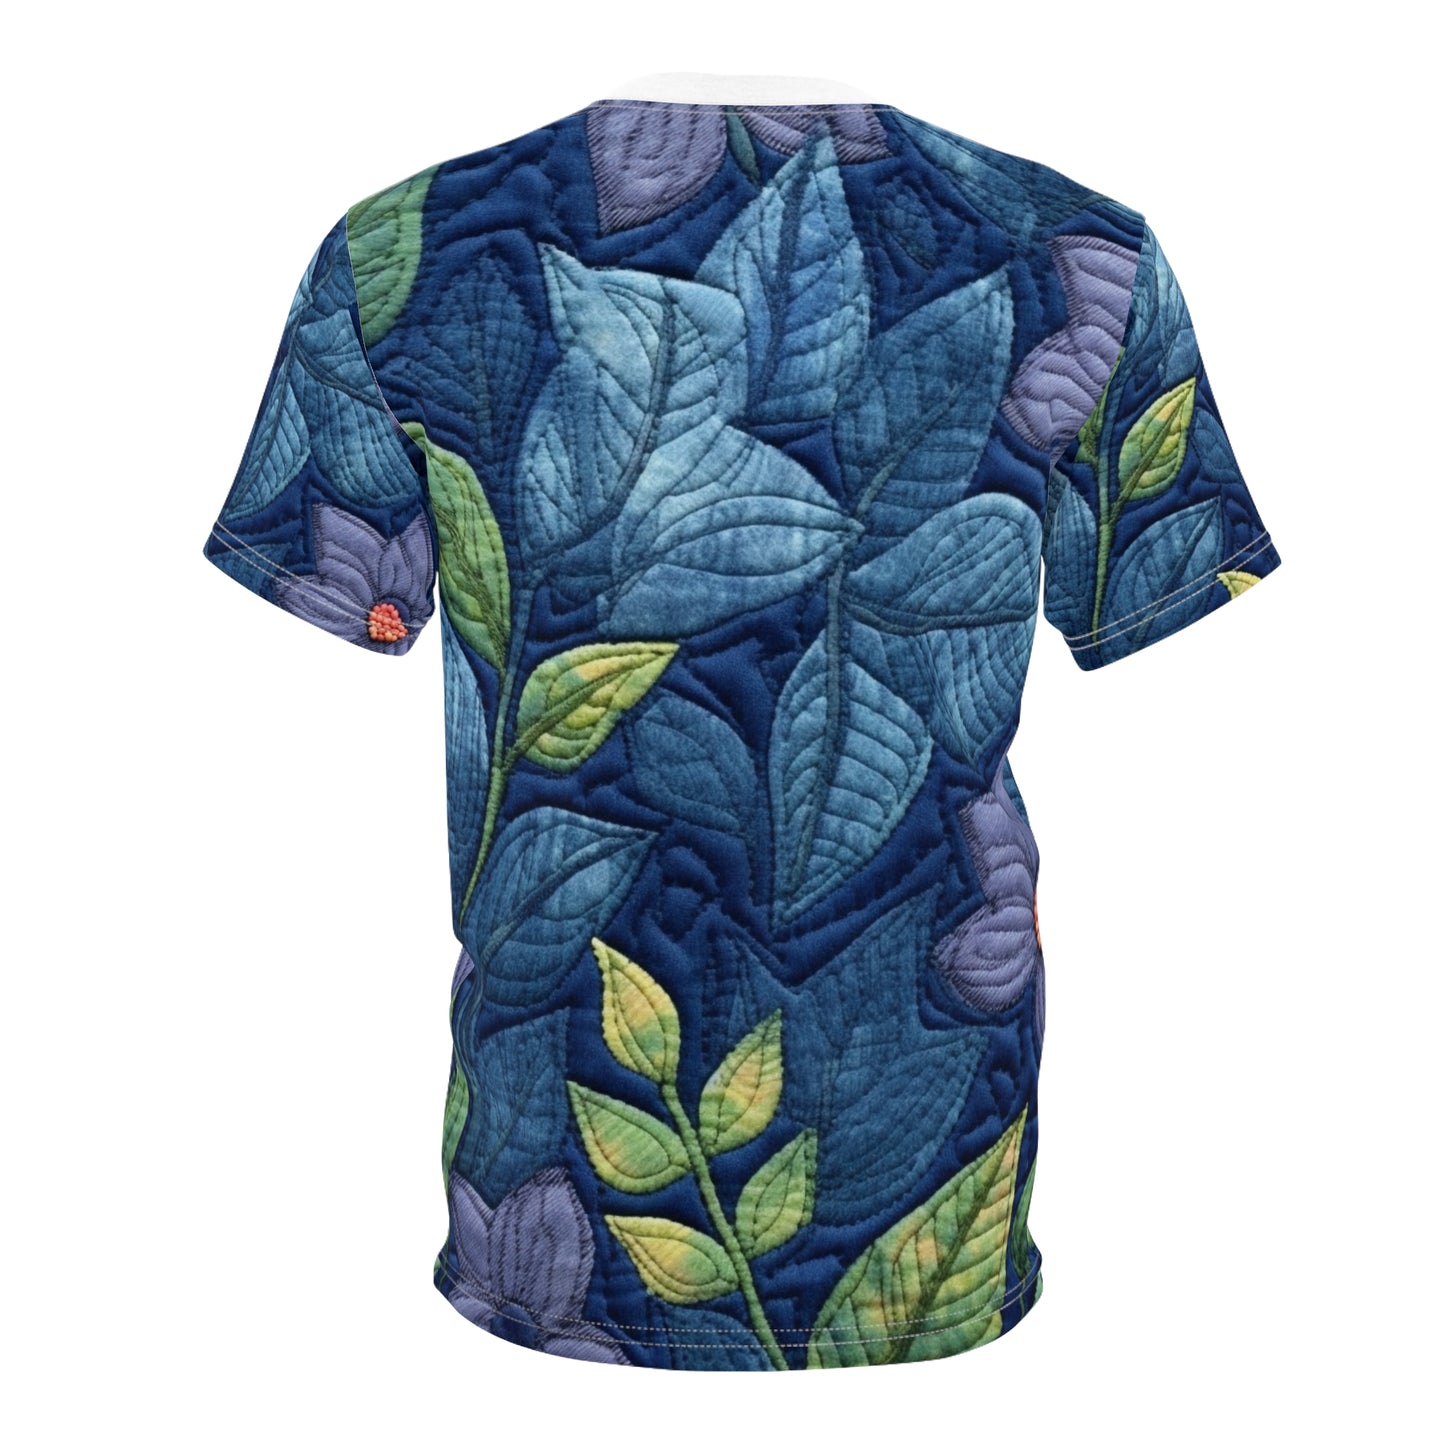 Floral Embroidery Blue: Denim-Inspired, Artisan-Crafted Flower Design - Unisex Cut & Sew Tee (AOP)